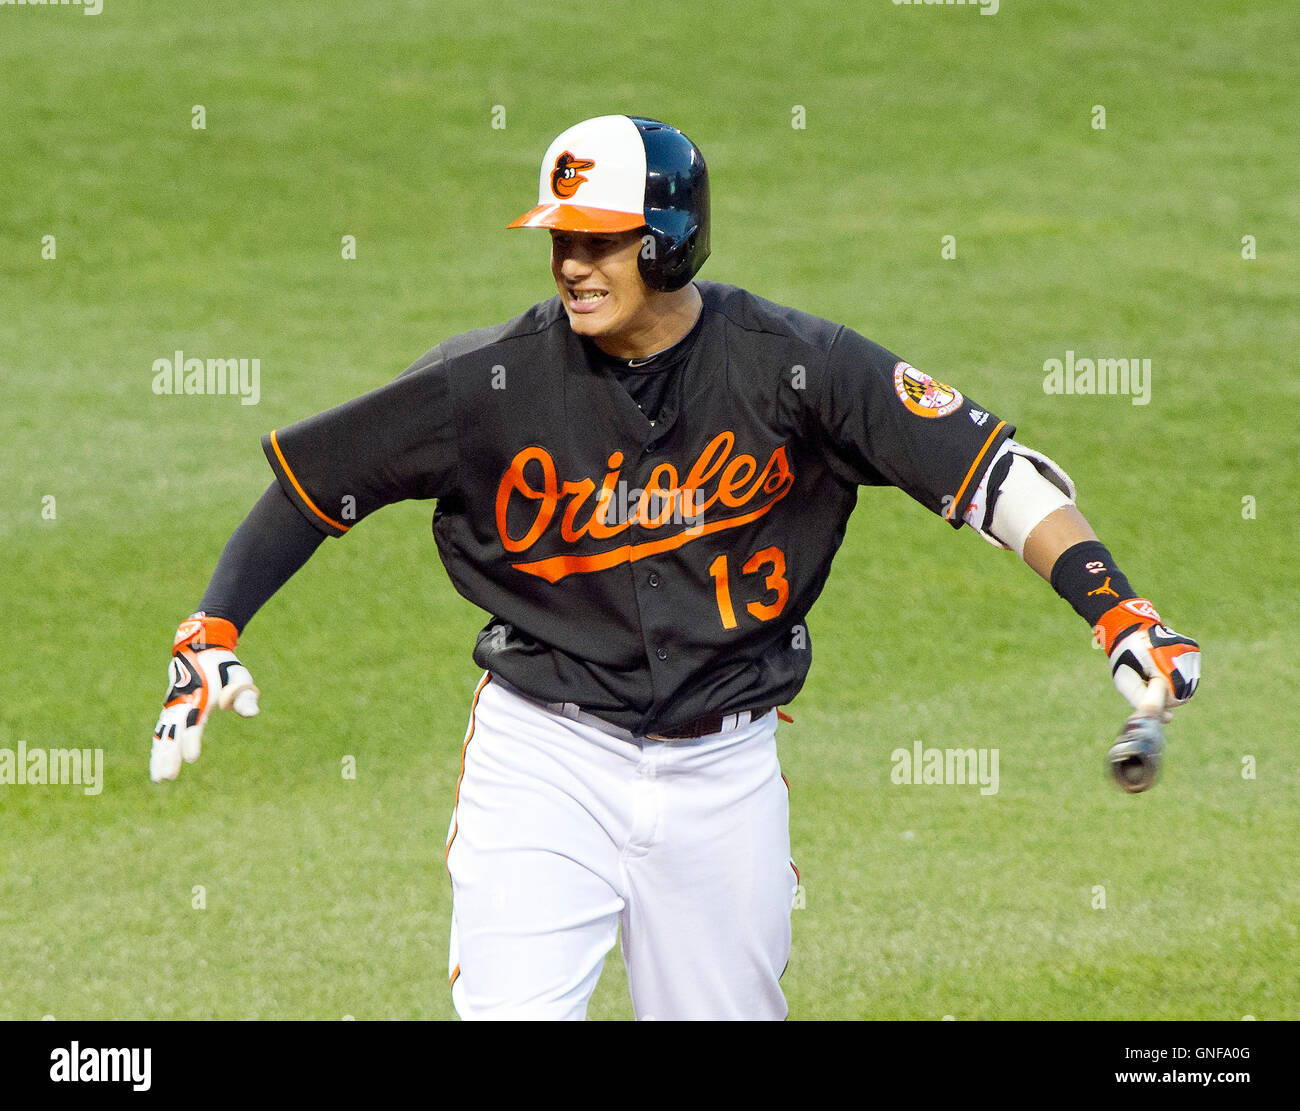 manny machado Archives - Page 3 of 4 - Eutaw Street Report